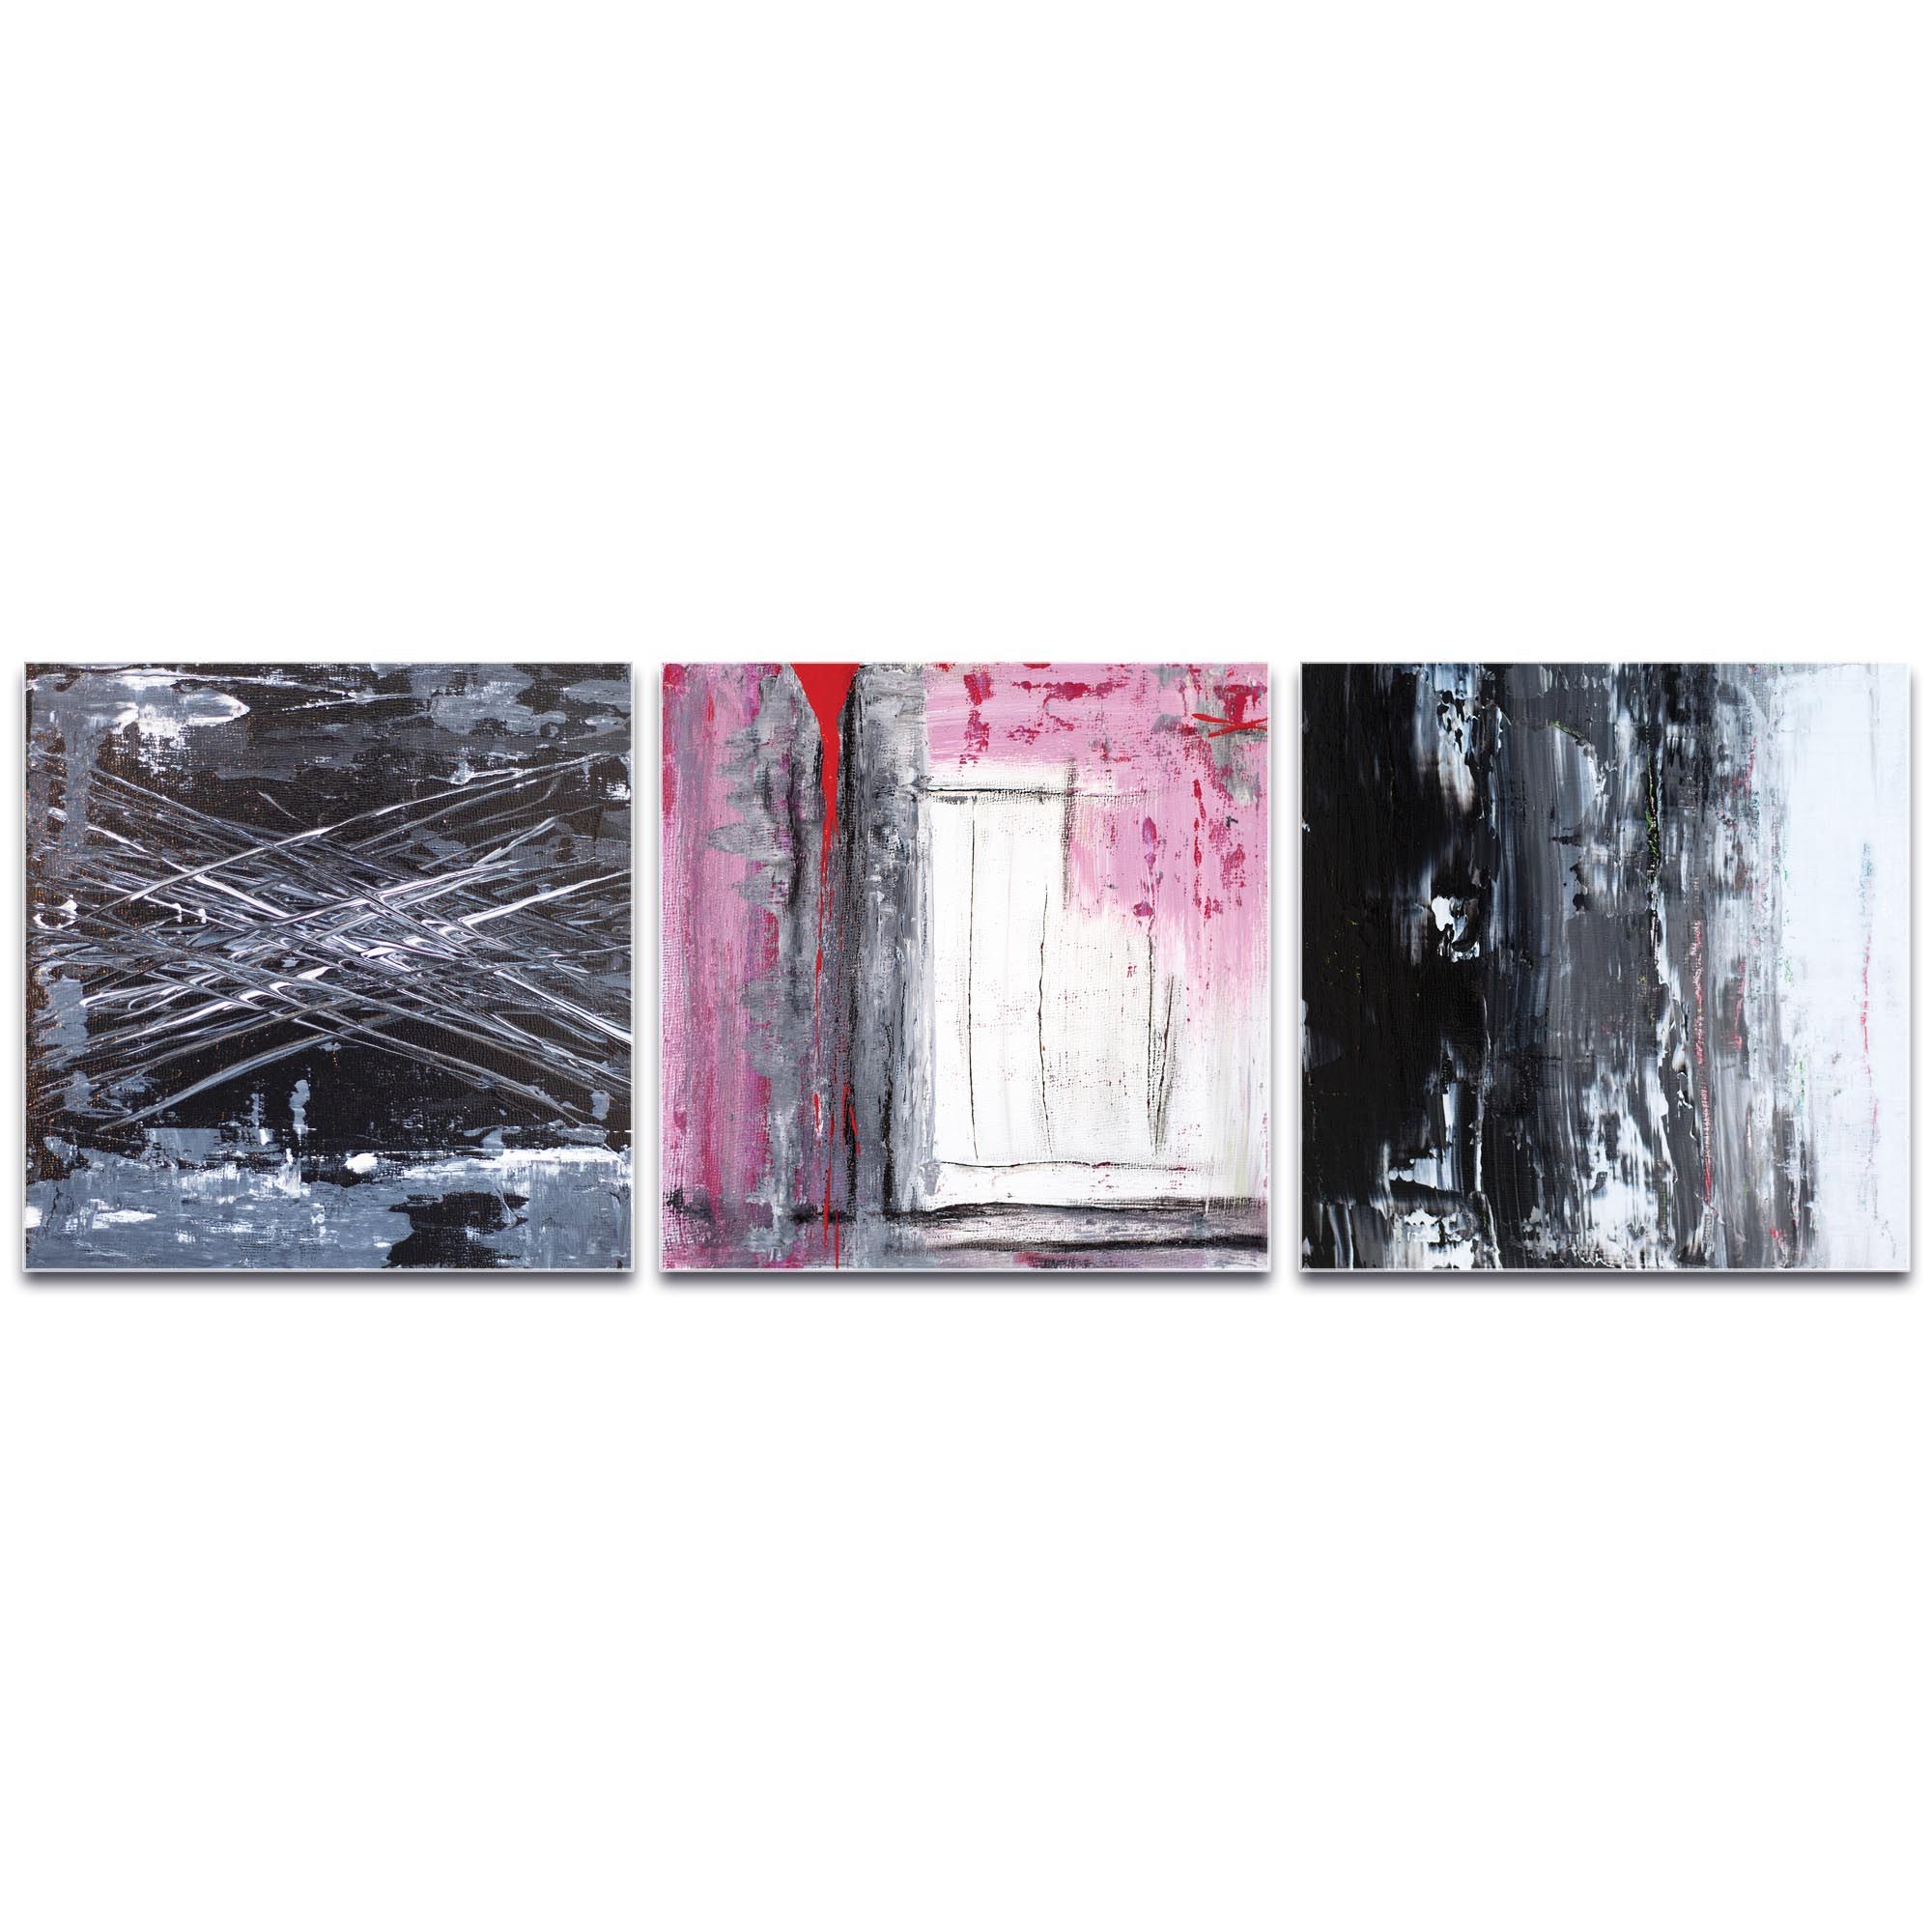 Metal Art Studio – Urban Triptych 6 Largeceleste Reiter – Abstract Pertaining To Latest Urban Metal Wall Art (View 10 of 20)